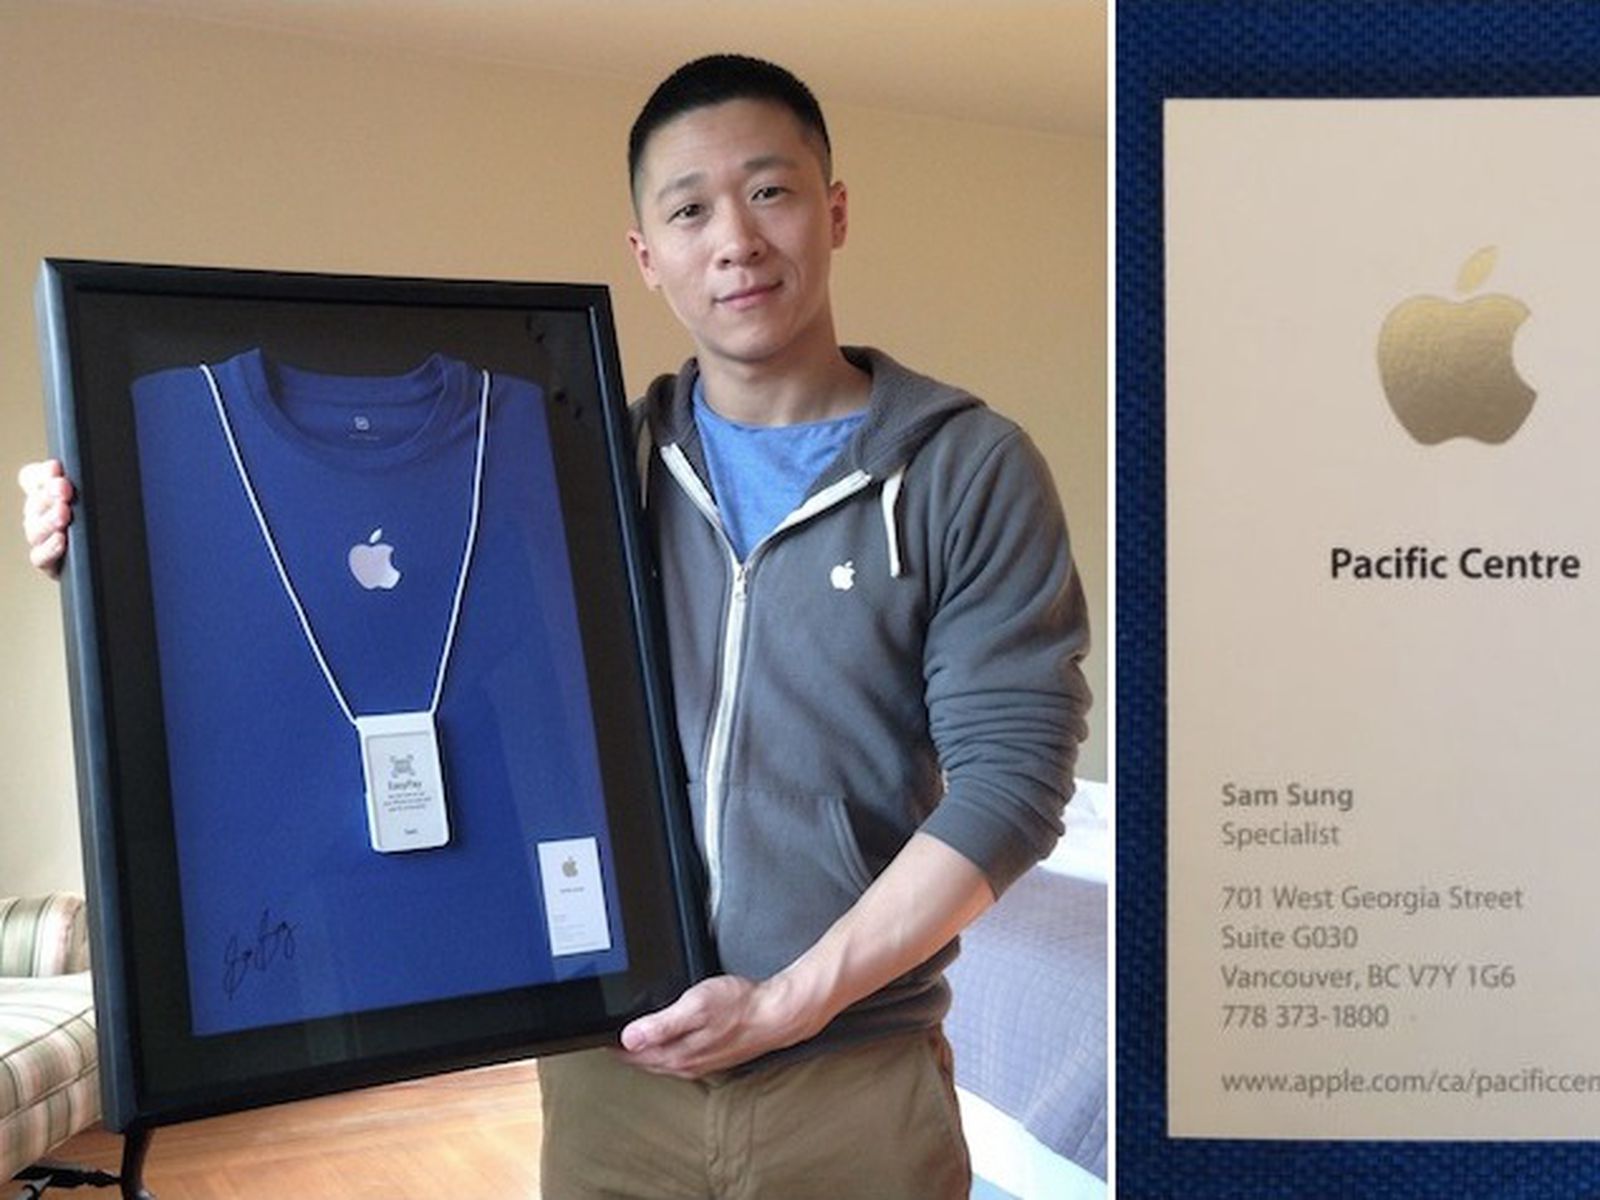 Former Apple Employee Sam Sung Auctioning Business Card and Uniform for Charity -